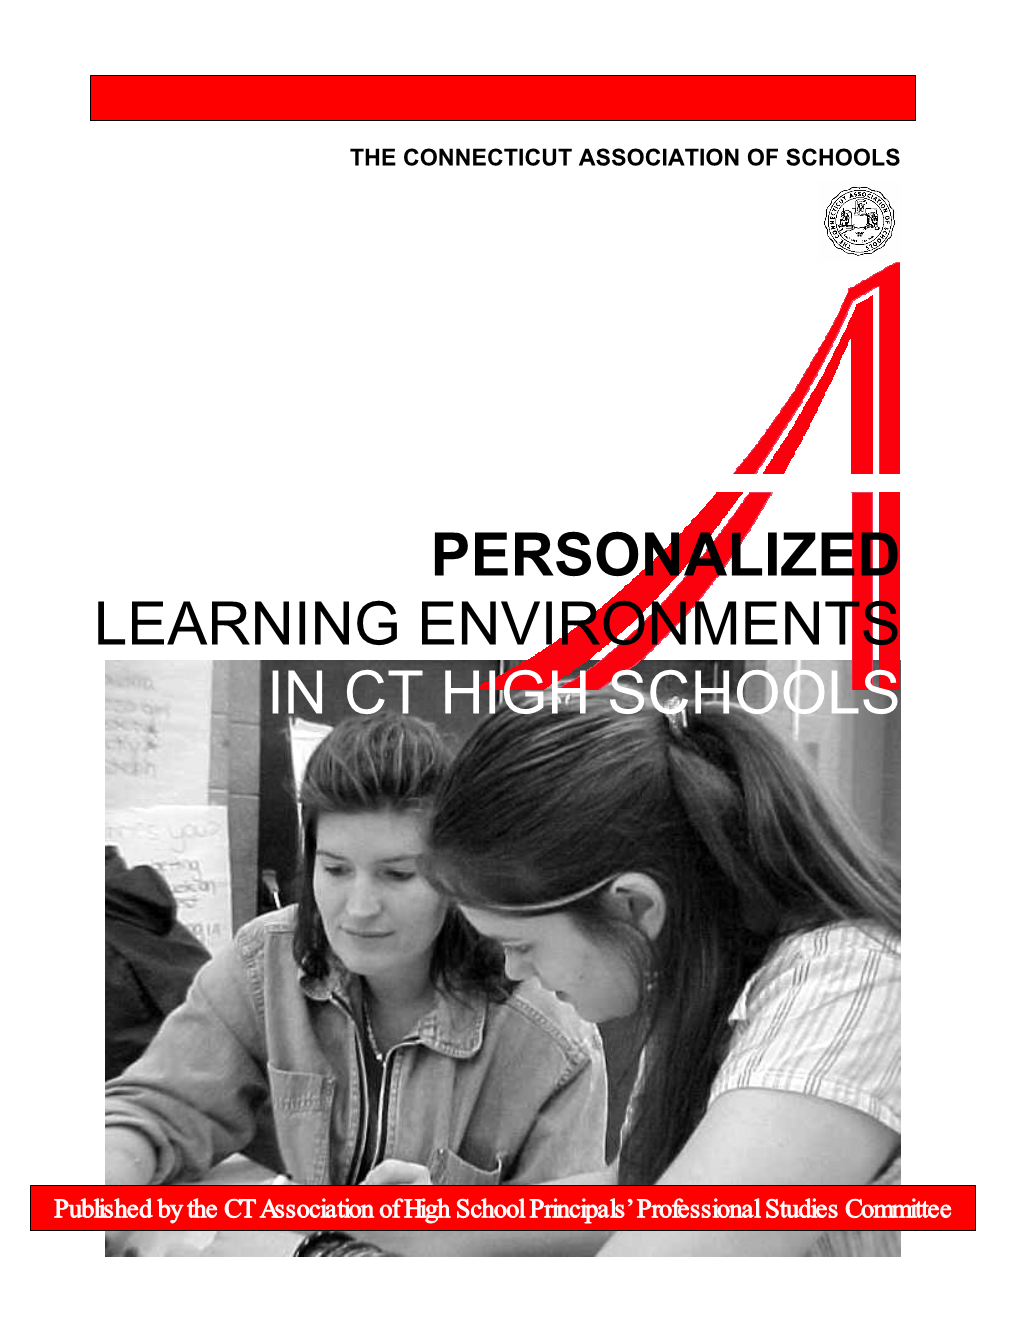 Personalized Learning Environments in Ct High Schools